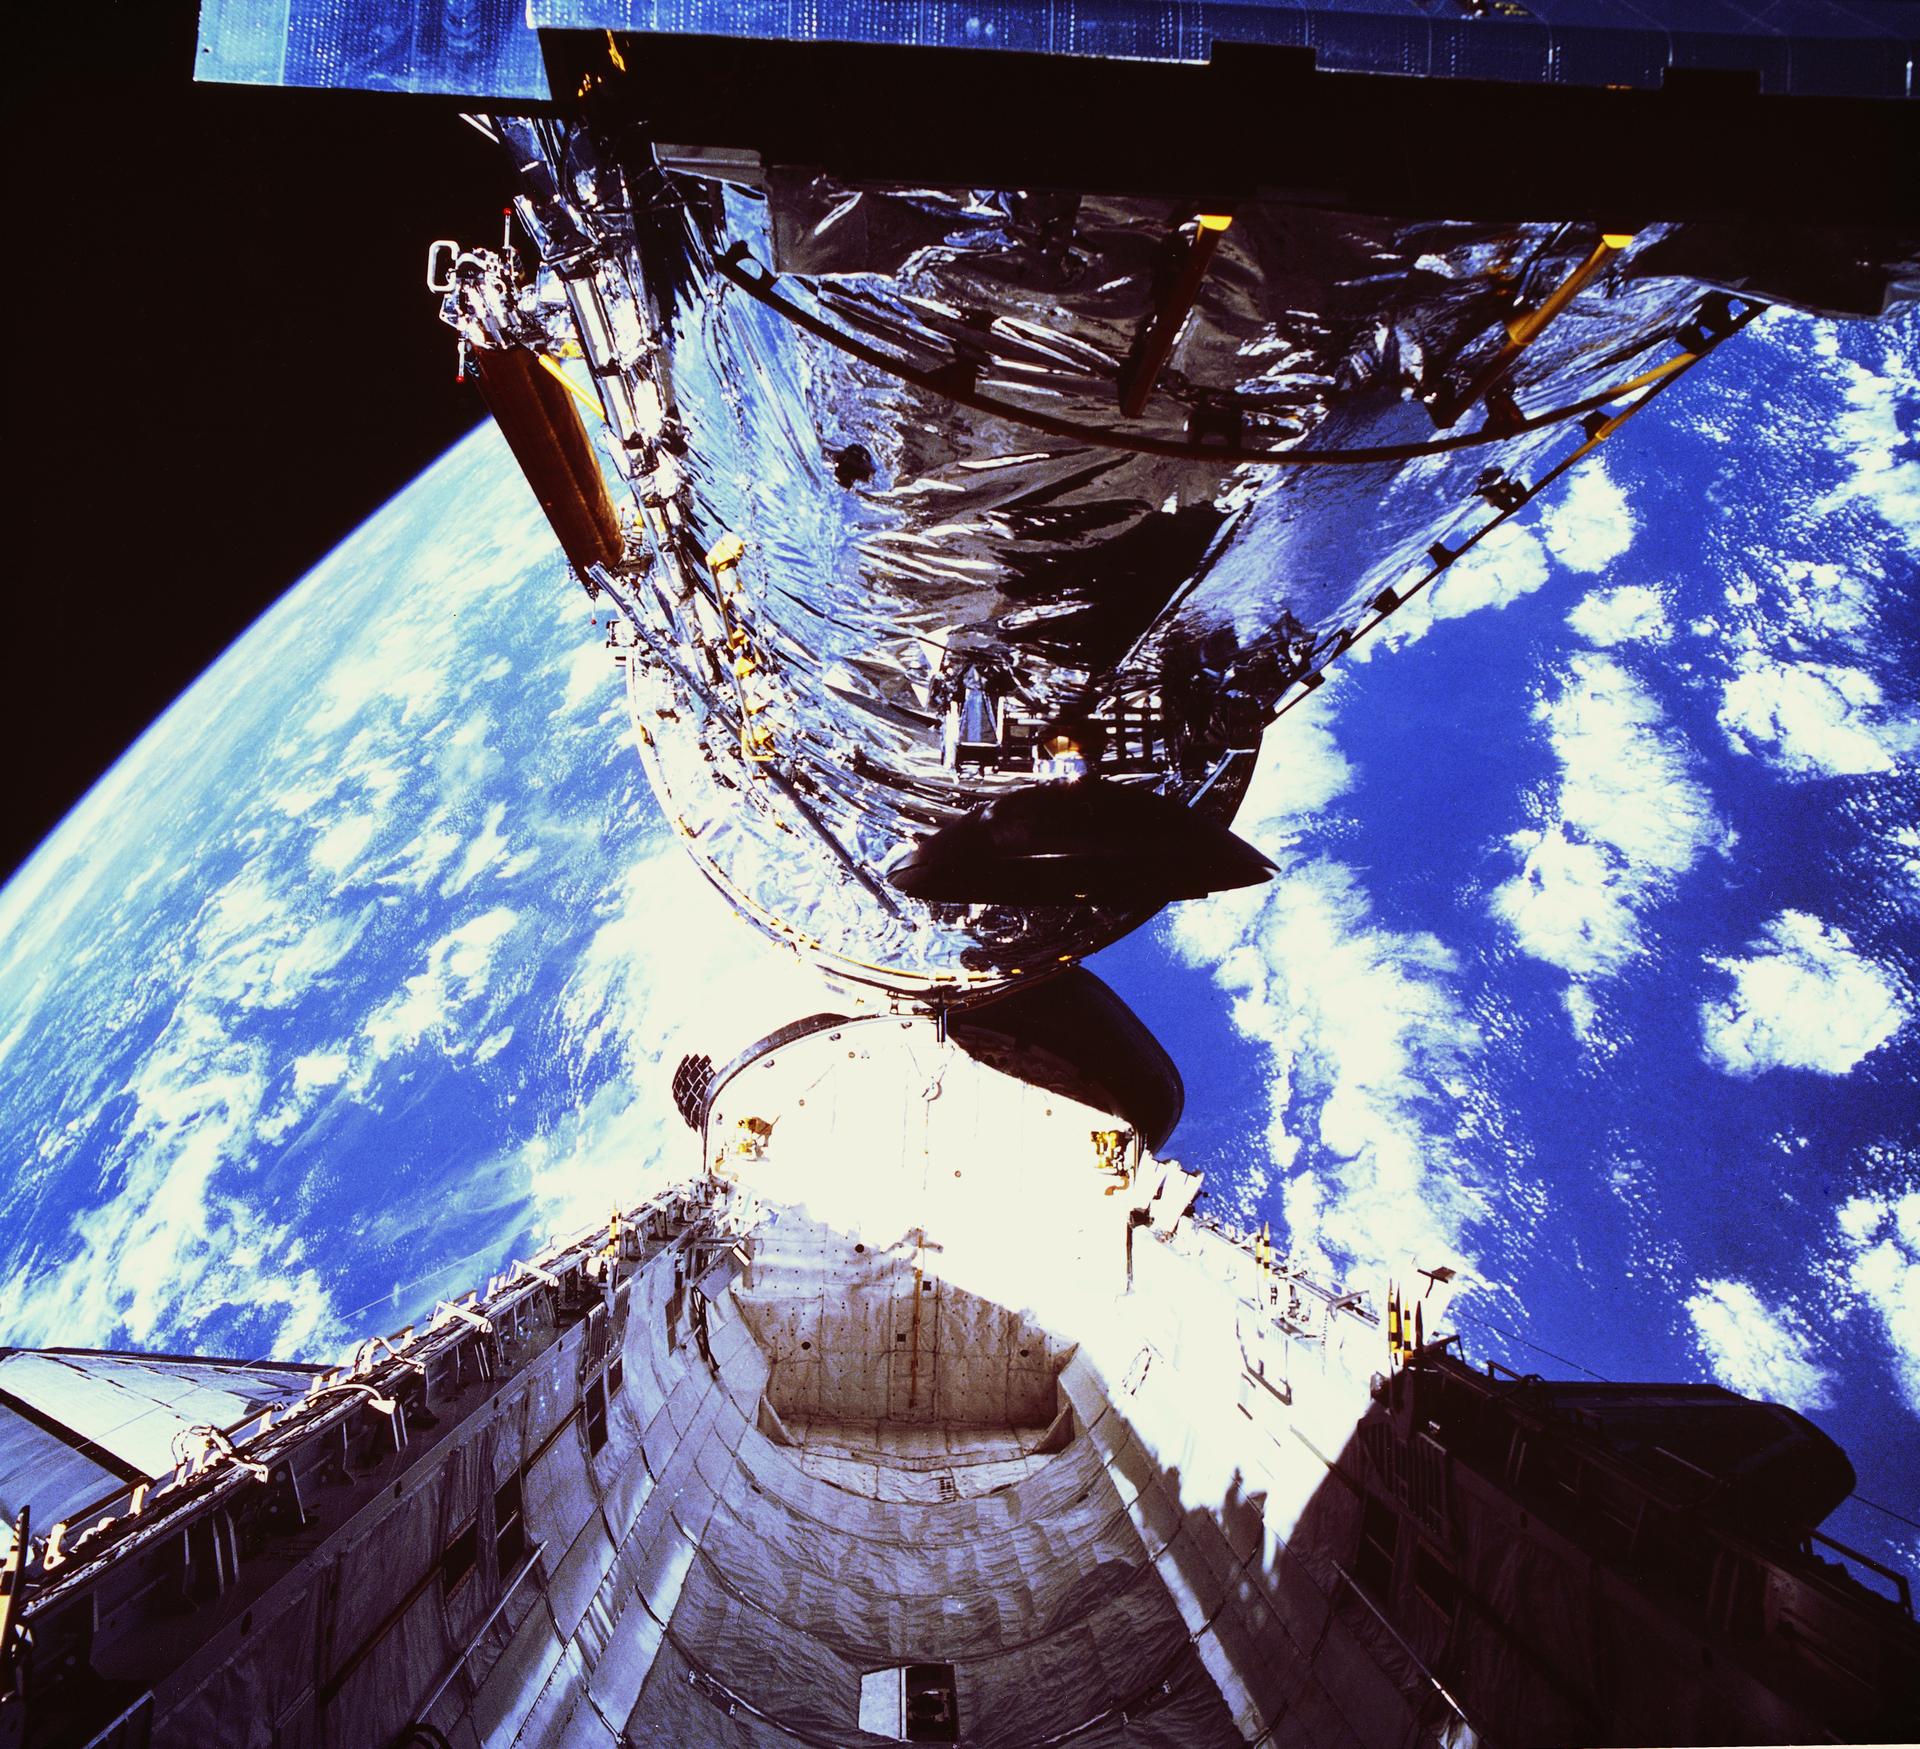 The Hubble Space Telescope is deployed from the cargo bay of space shuttle Discovery on April 25, 1990.